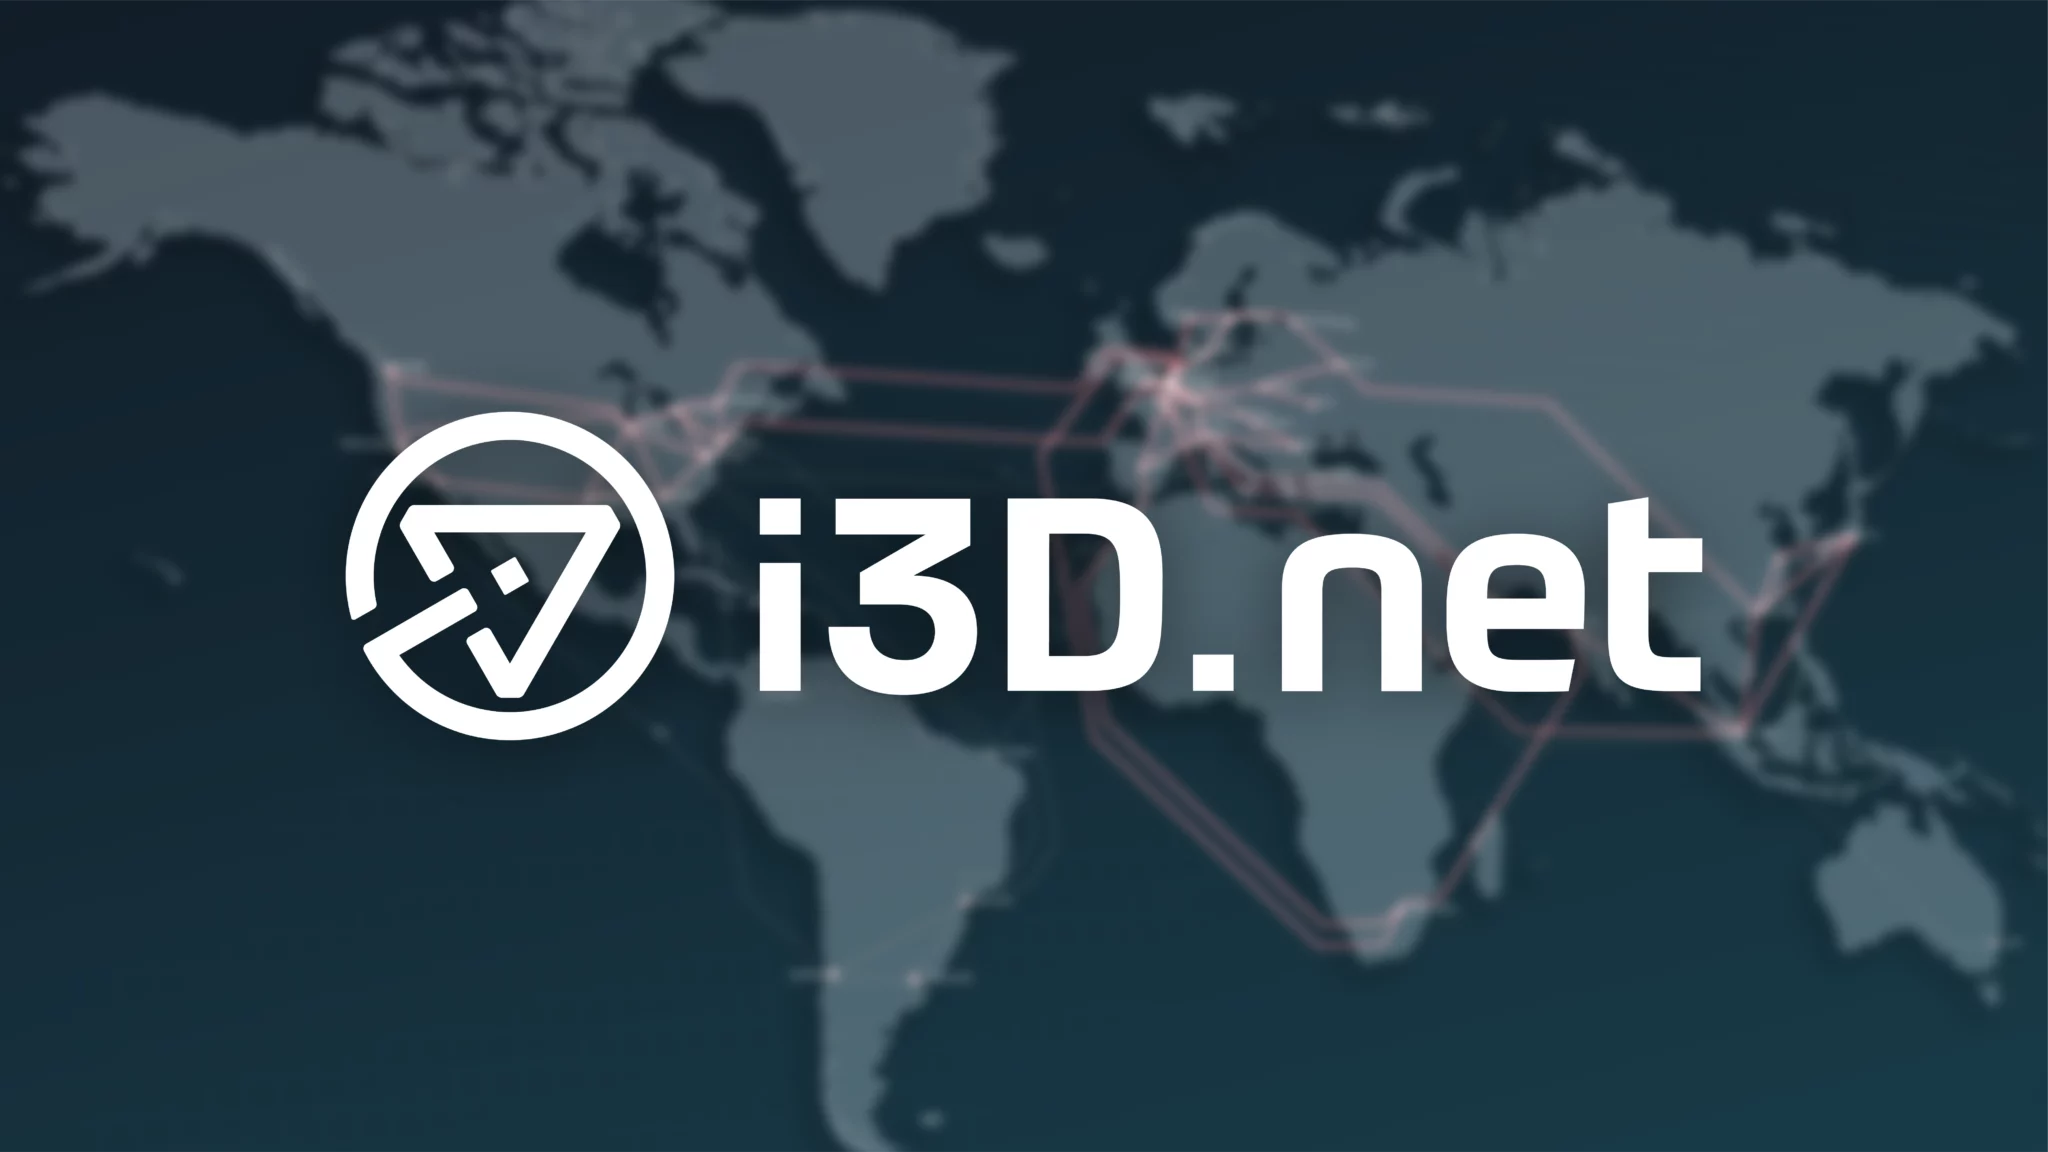 The image features the new i3D.net logo with the world map behind it.